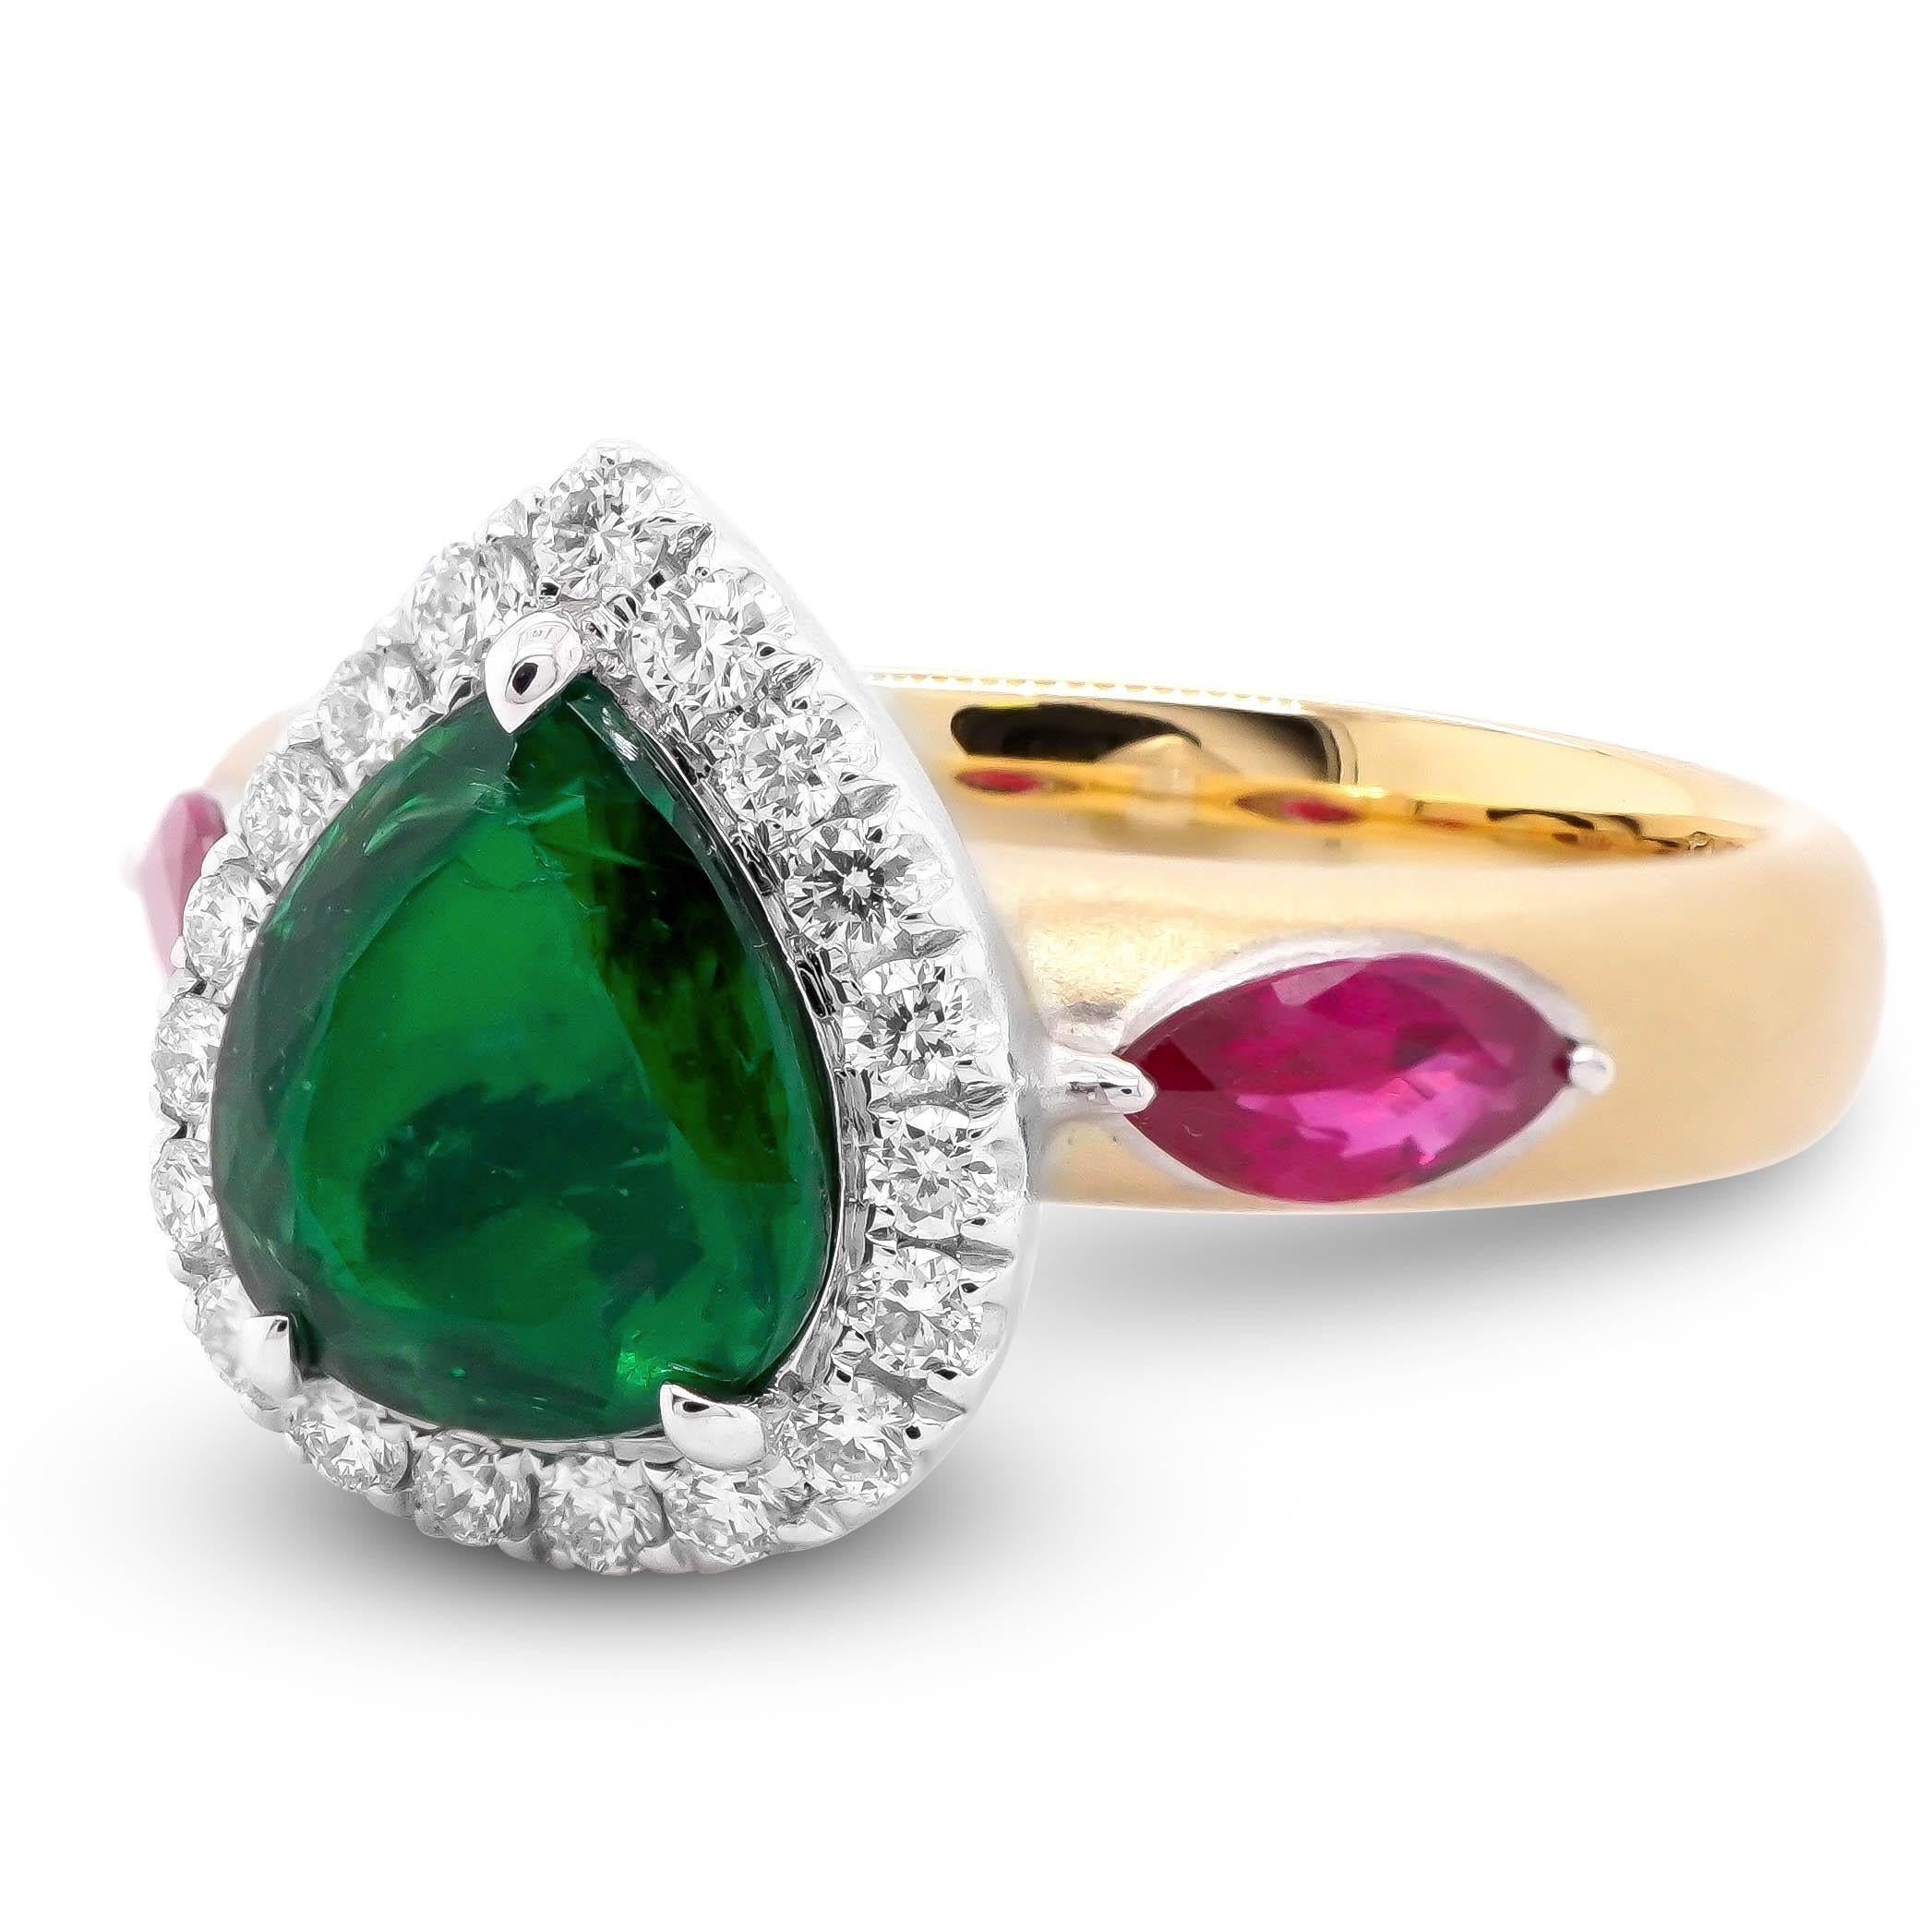 A deep saturated vivid green Emerald weighing 1.05 carat is set along with 0.42 carat of vivid red ruby and 0.23 carat of white round diamond. The ring is set in 18K yellow gold and has been matt finished by hand in Hong Kong